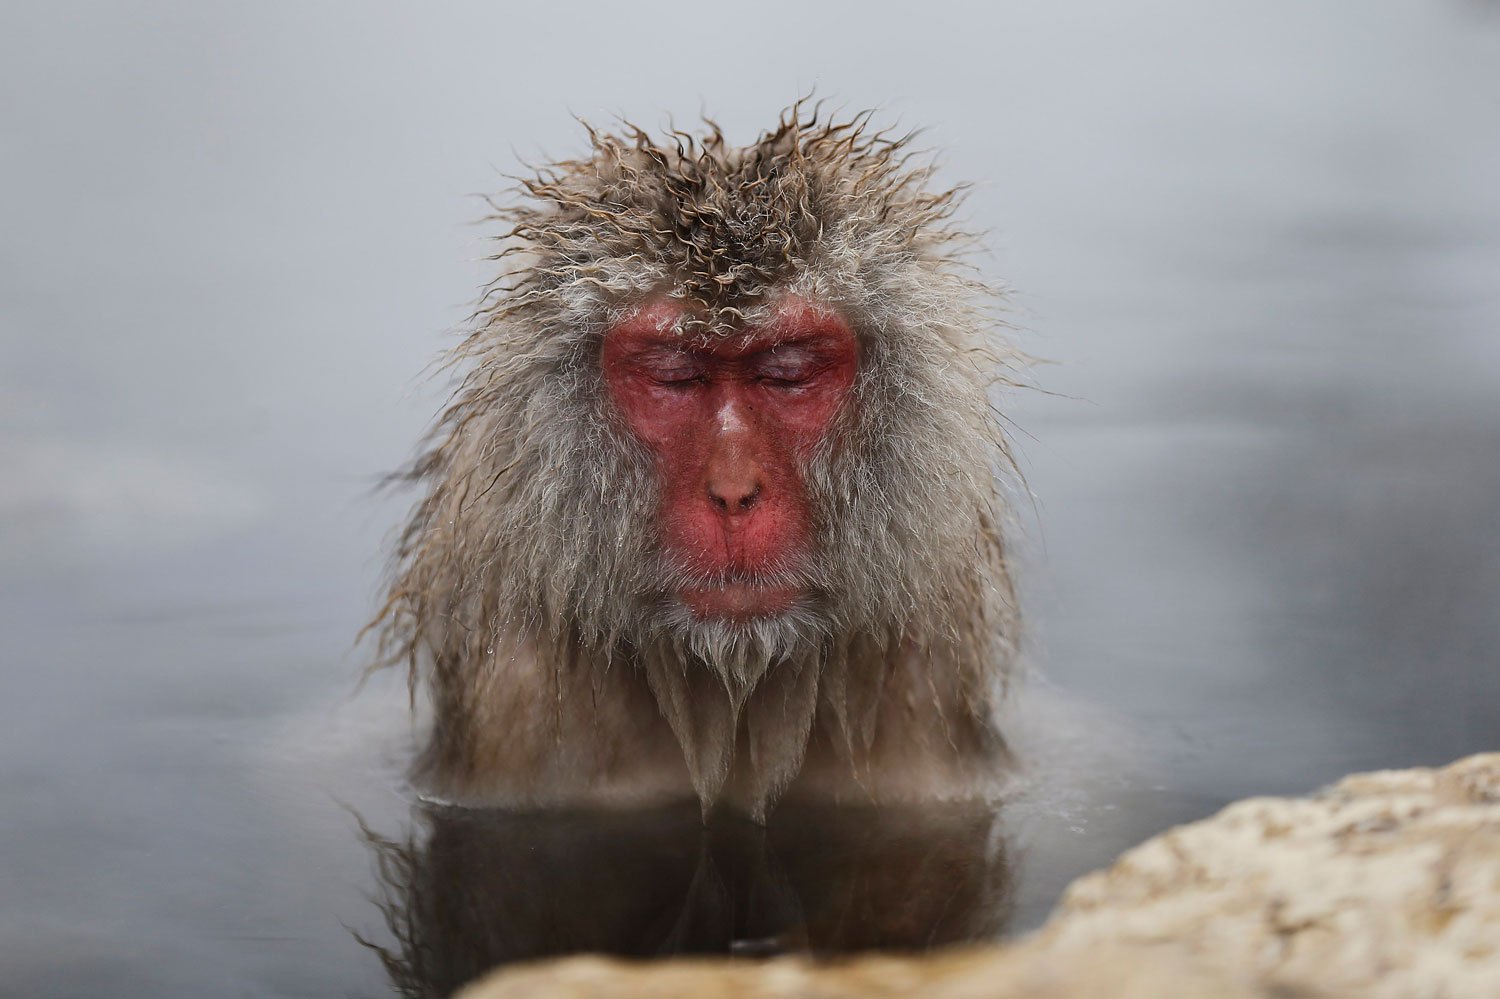 A Japanese Macaque  - or Snow Monkey - soaks in a hot spring at a snow-covered valley in Yamanouchi town, central Japan, Jan. 20, 2014.